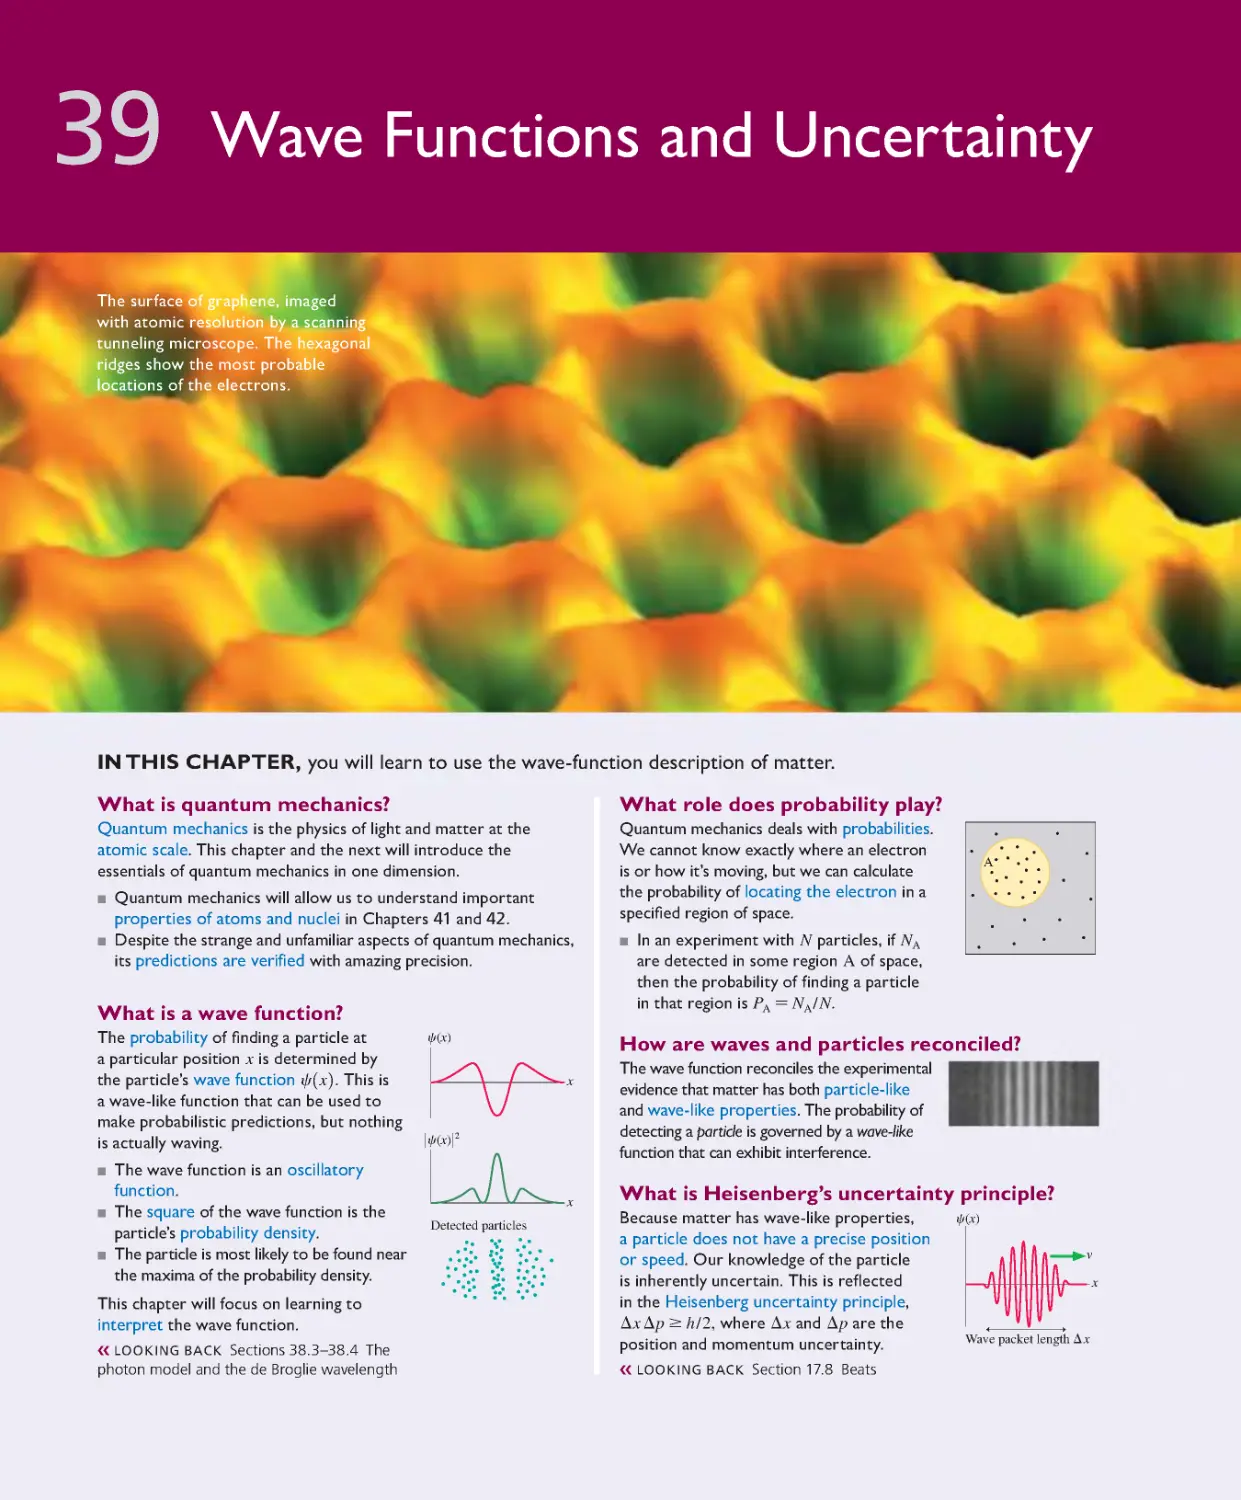 Chapter 39: Wave Functions and Uncertainty